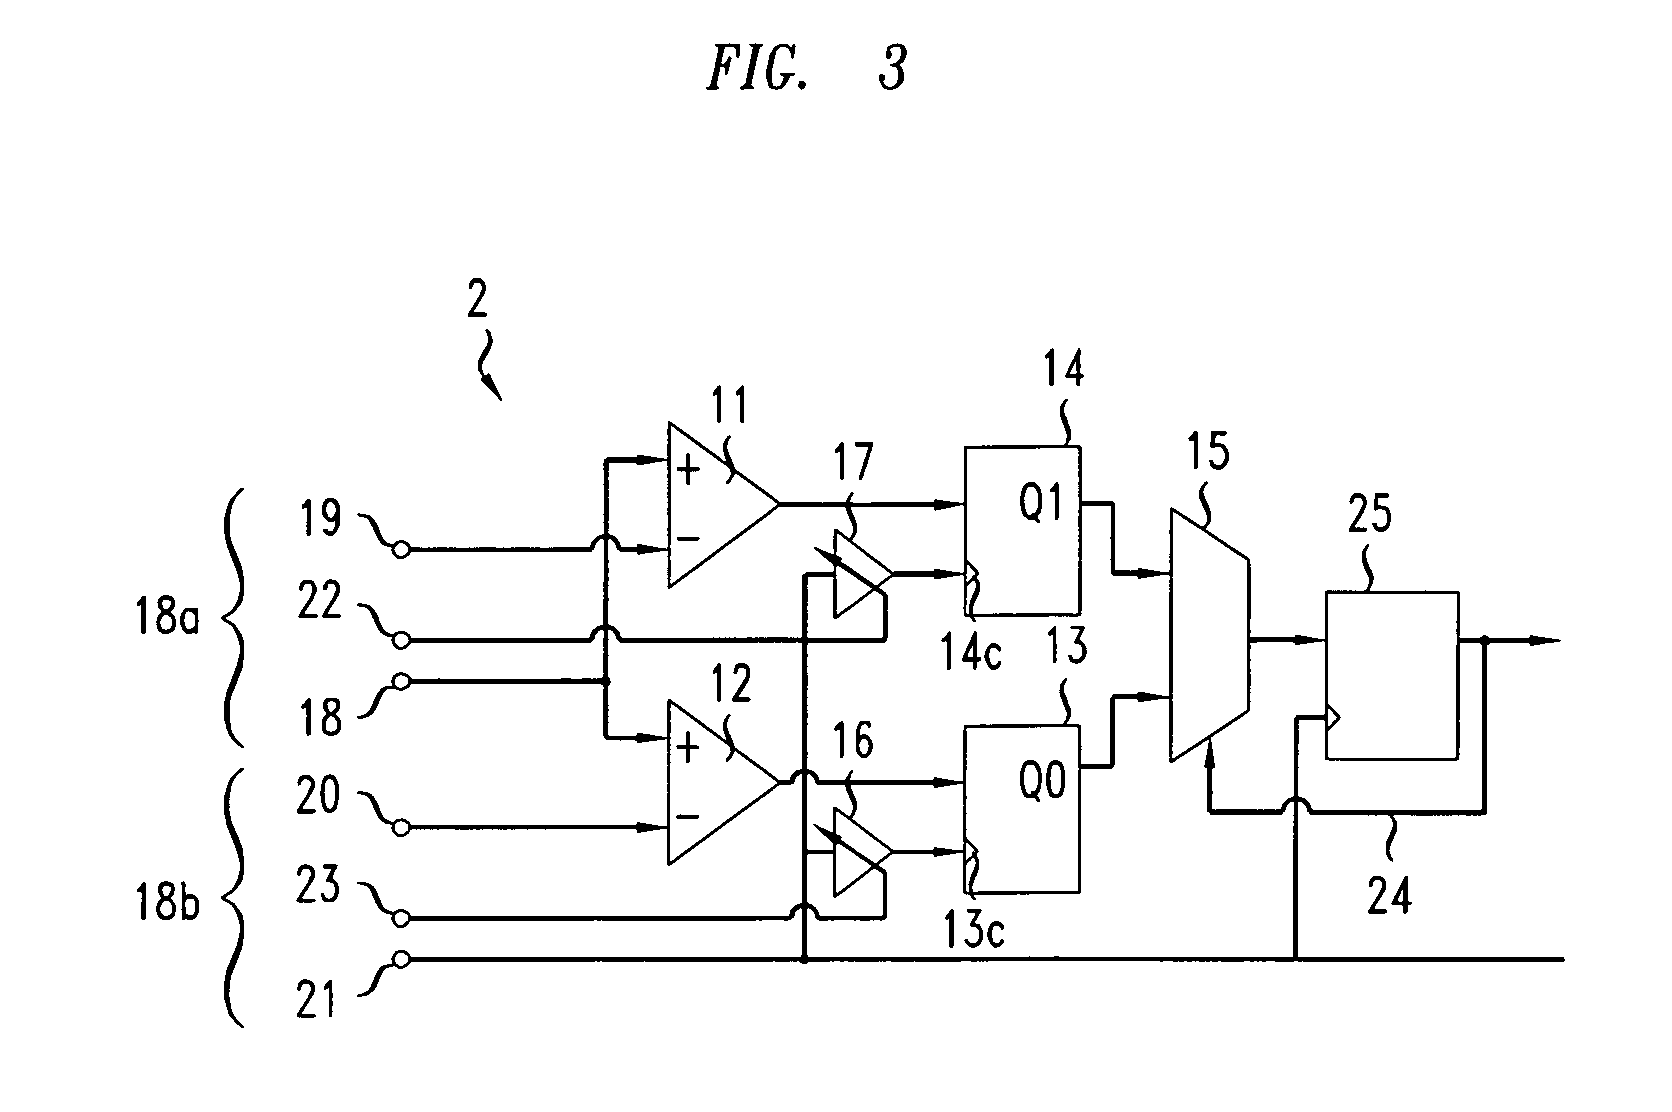 Decision feedback structure with selective sampling phase control